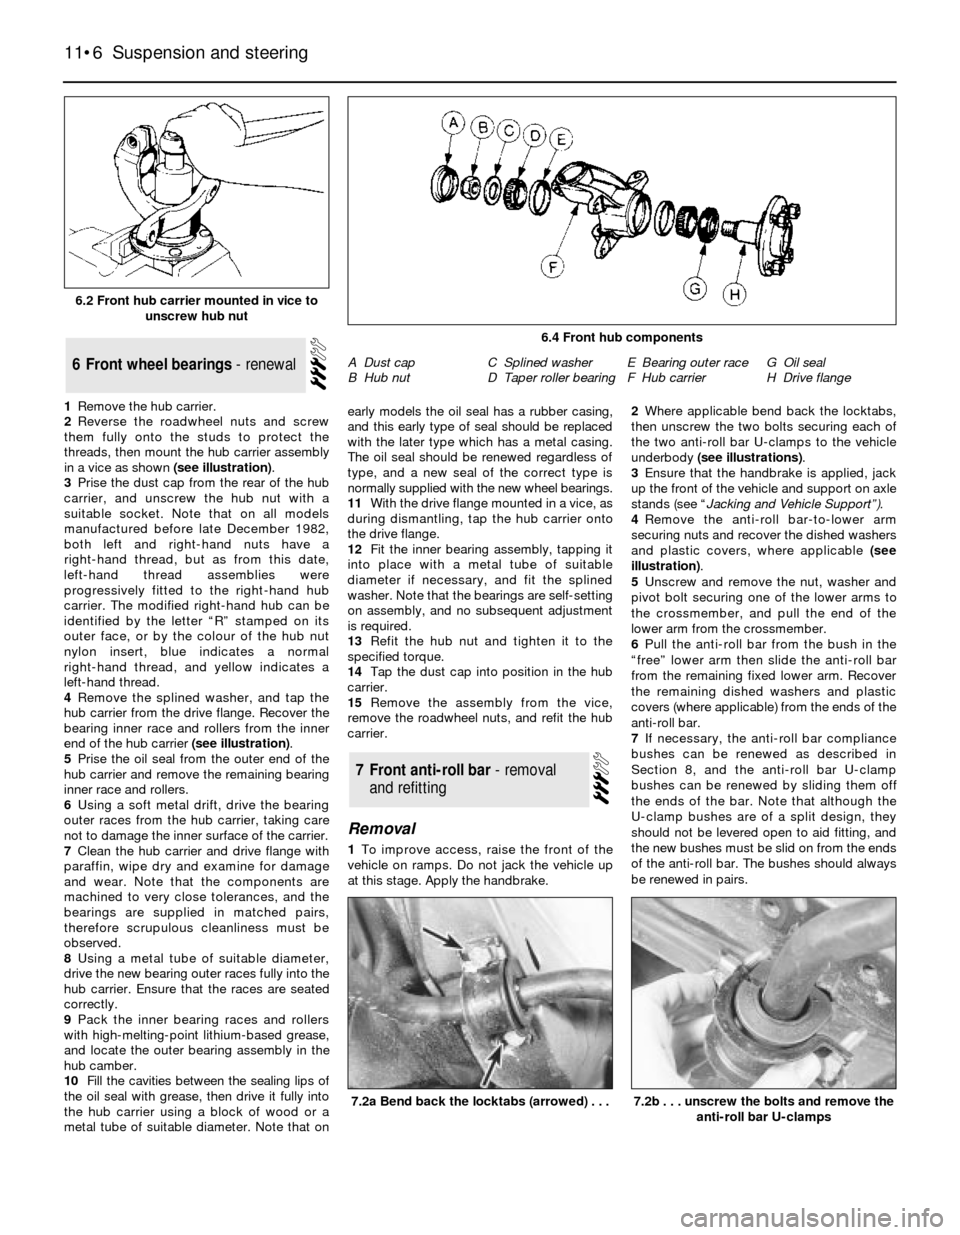 FORD SIERRA 1986 1.G Suspension And Steering Workshop Manual 1Remove the hub carrier.
2Reverse the roadwheel nuts and screw
them fully onto the studs to protect the
threads, then mount the hub carrier assembly
in a vice as shown (see illustration).
3Prise the d